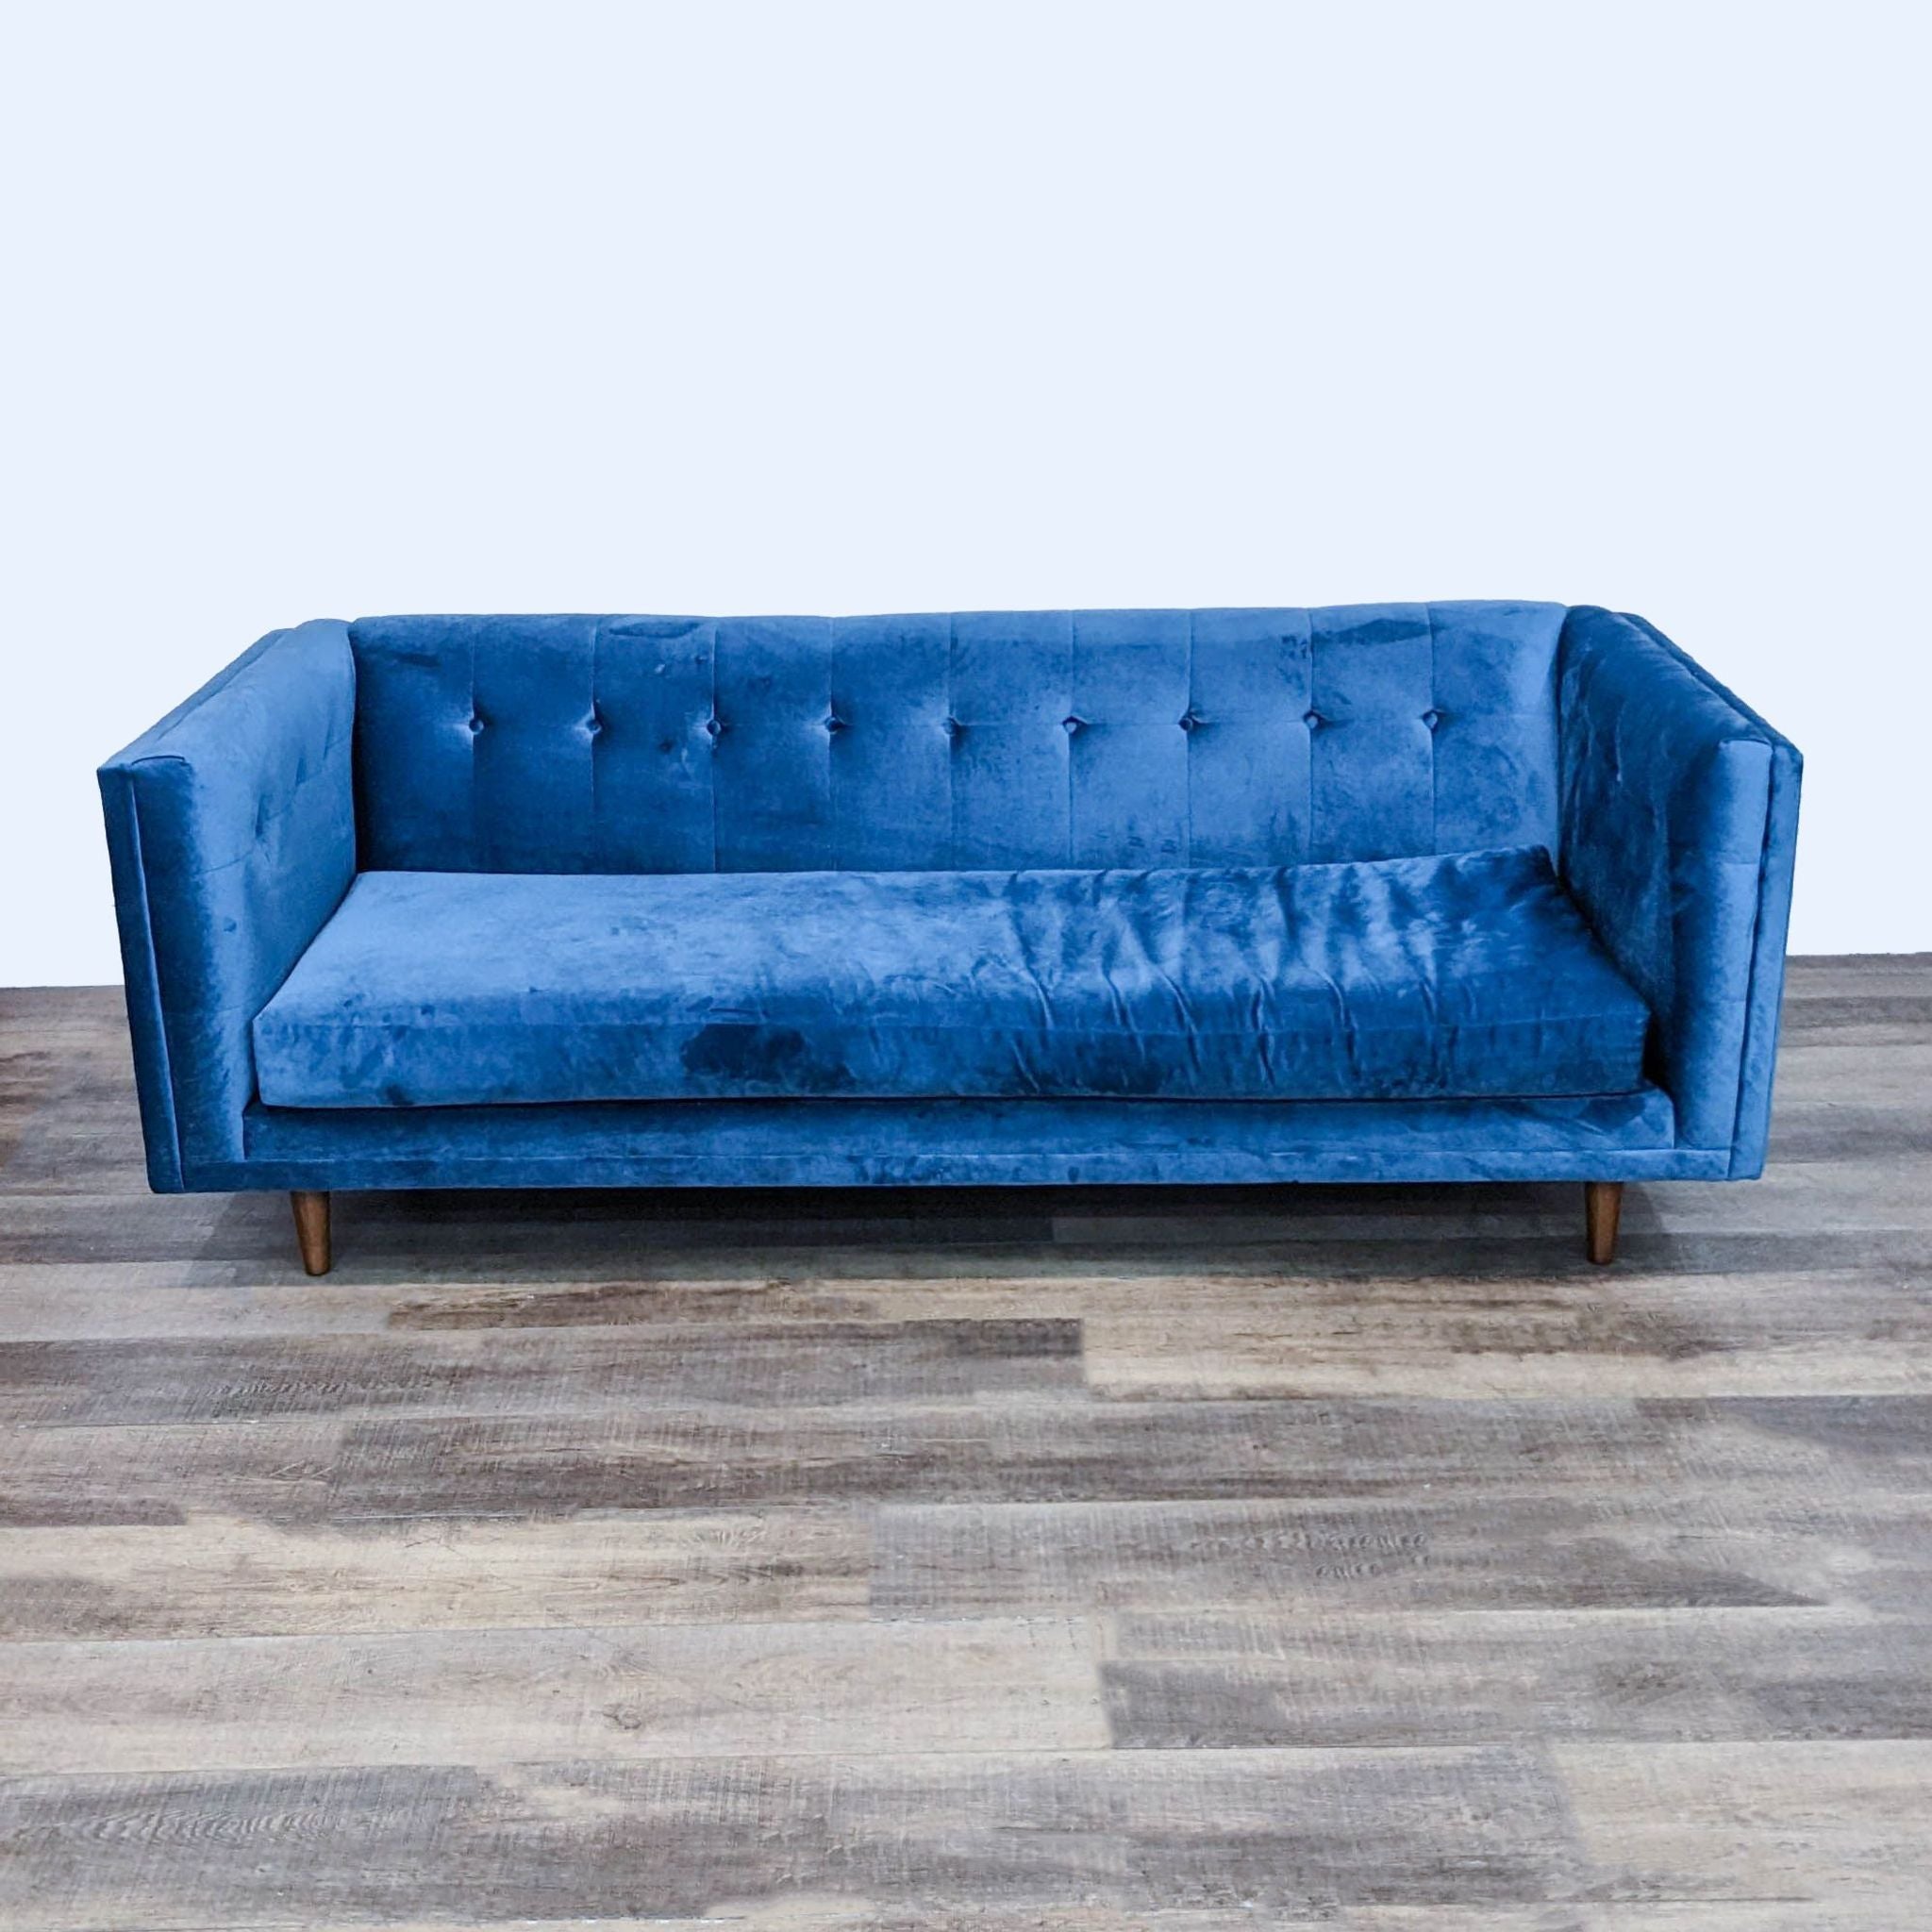 West Elm blue velvet sofa, 3-seat with tufted back and tapered wood feet.